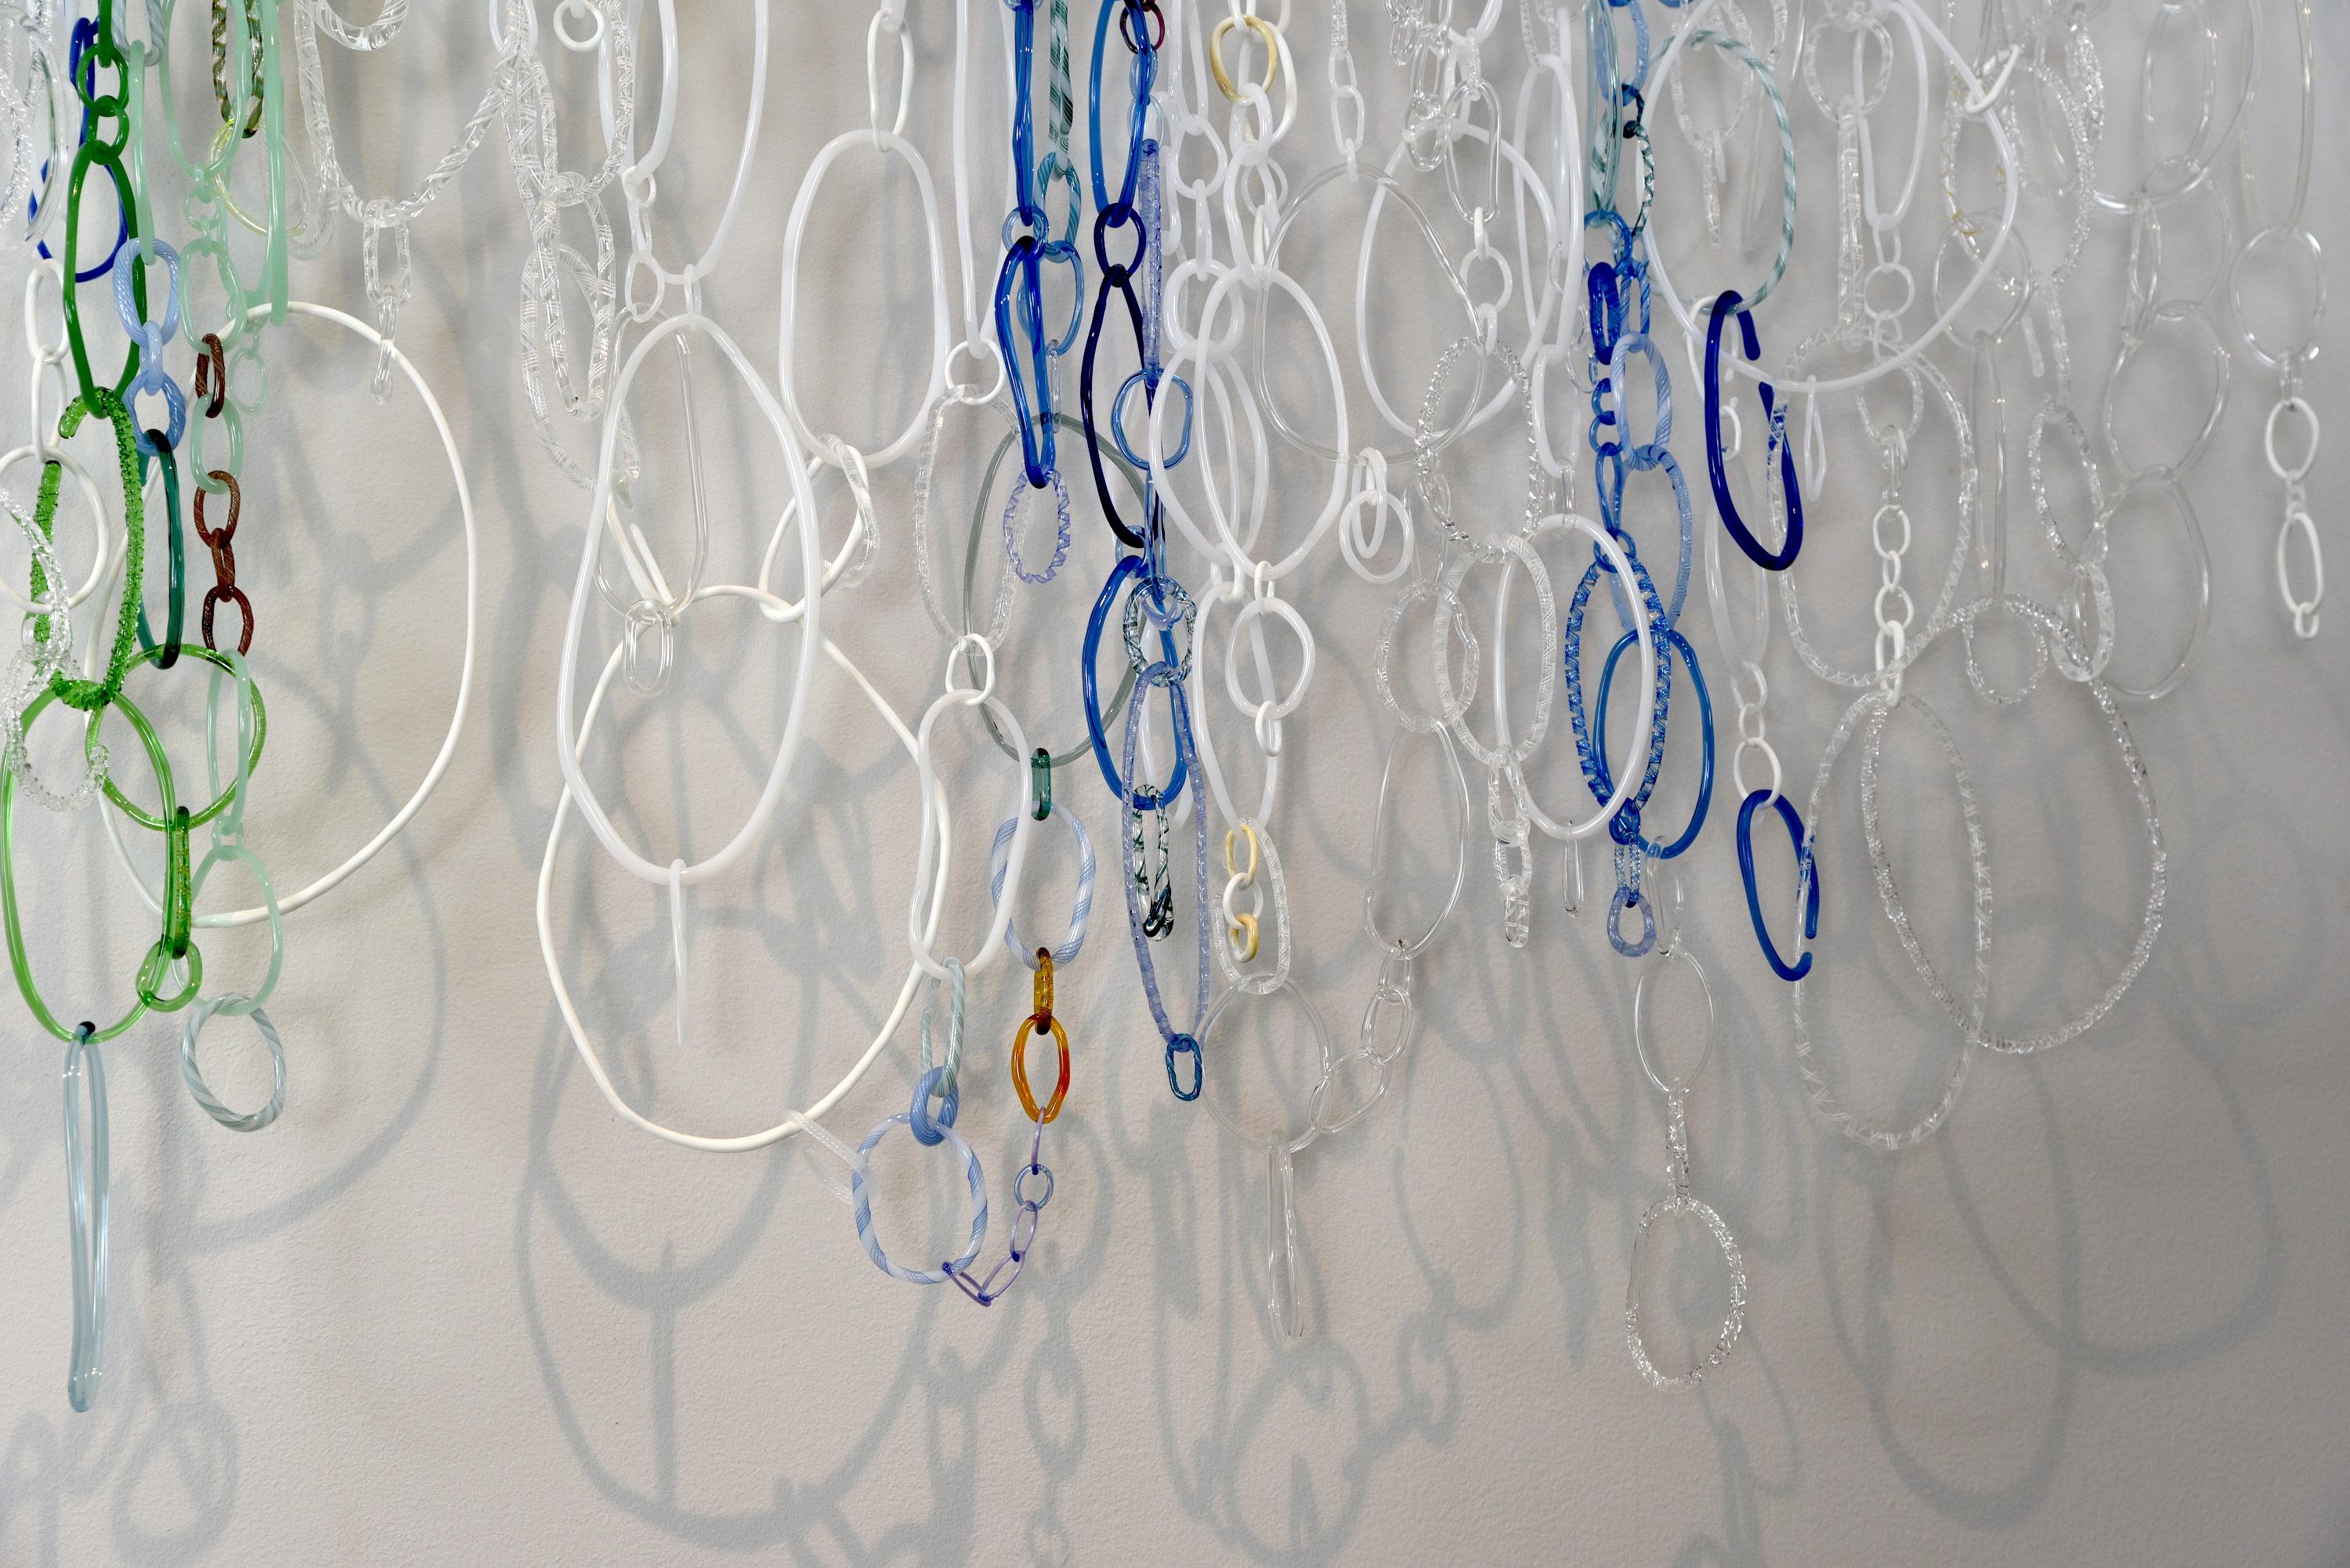 This hanging sculpture by David Licata is composed of free-form circular and oval loops of torch-worked borosilicate glass in white, clear, green, cobalt and periwinkle blue. The loops, in varying sizes and textures, cascade downward from a white